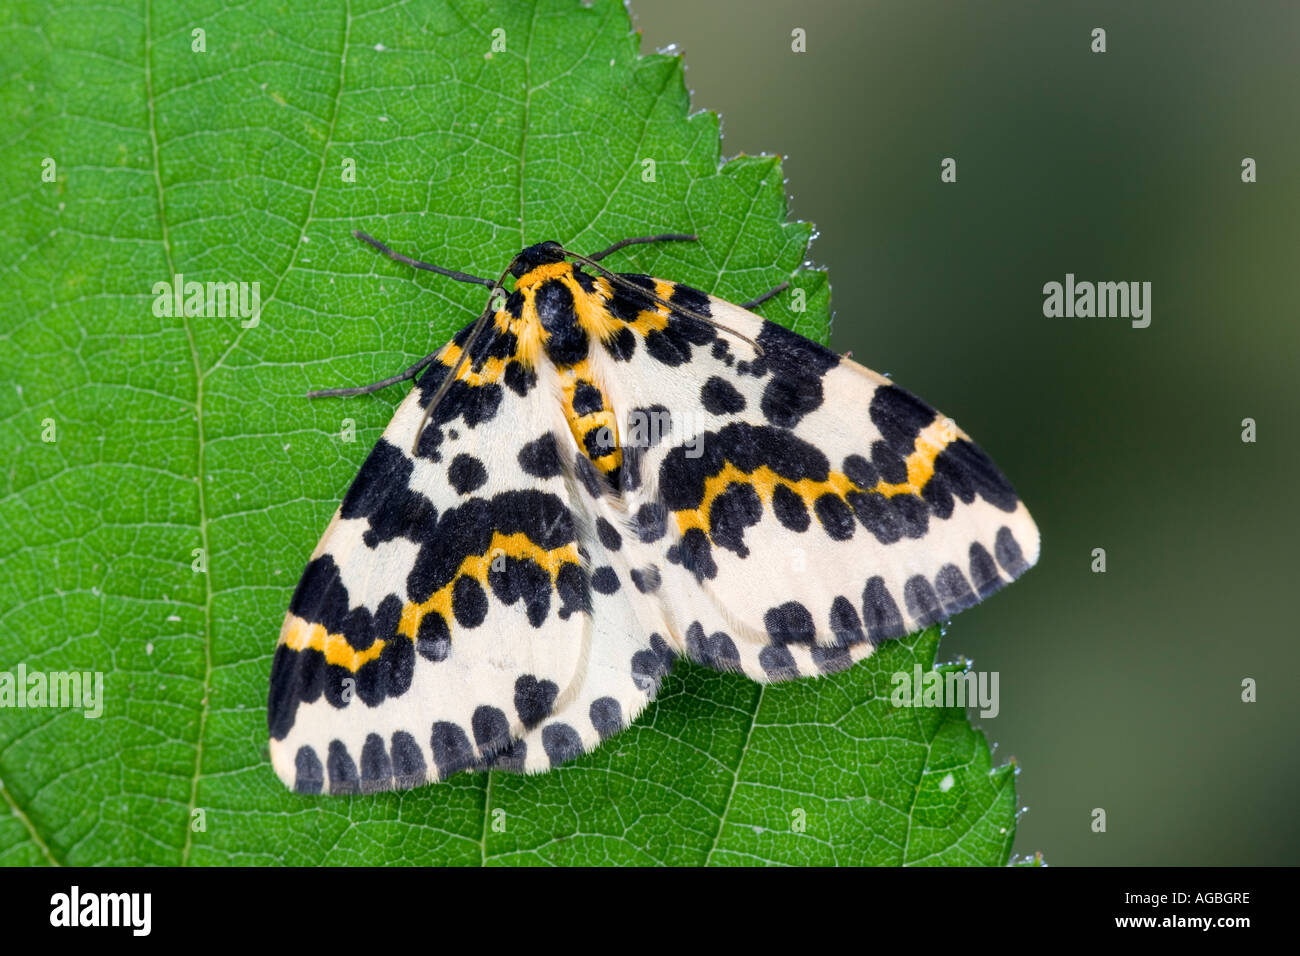 The Magpie Abraxas grossulariata at rest on leaf showing markings and detail Potton Bedfordshire Stock Photo